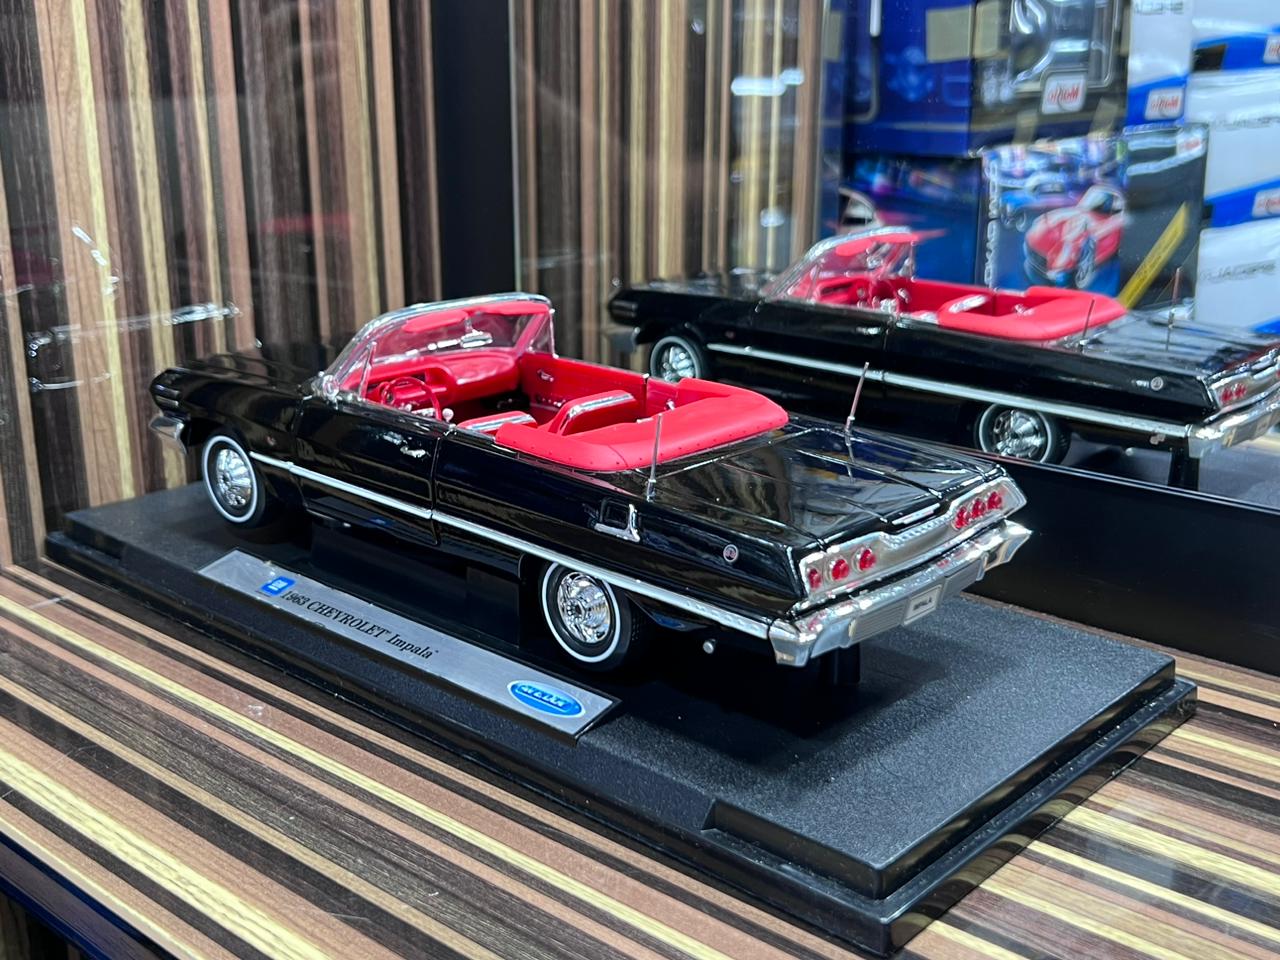 1/18 Diecast Chevrolet Impala 1963 by Welly